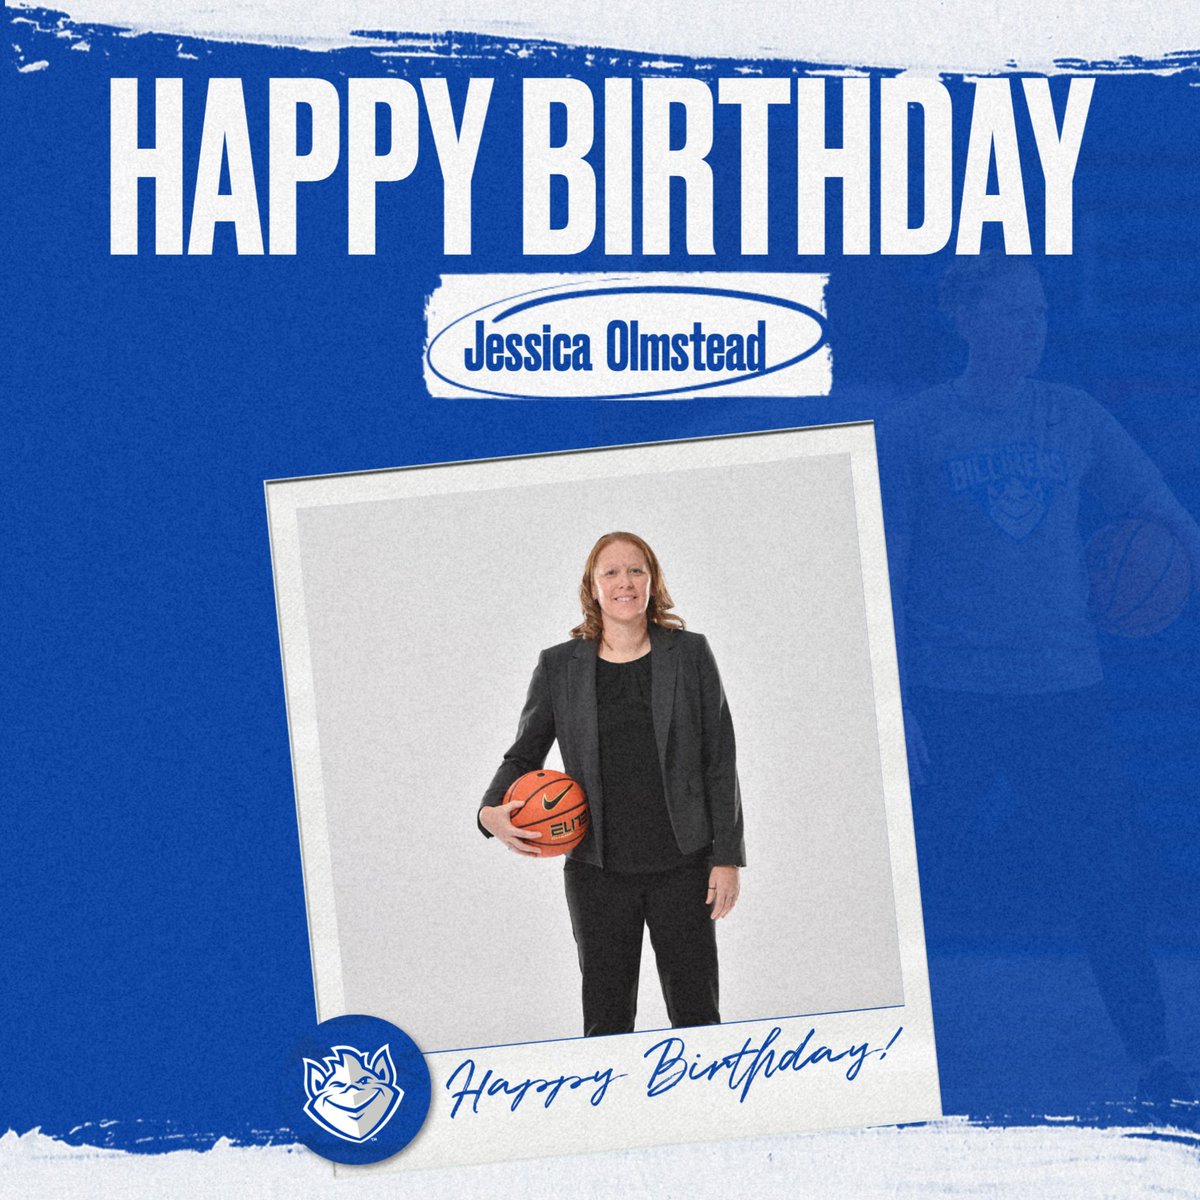 Billiken nation please help us in wishing our Director of Scouting and Program Development, Coach Jessica Olmstead a happy birthday! We hope you enjoy your special day 🎉🎉🎉